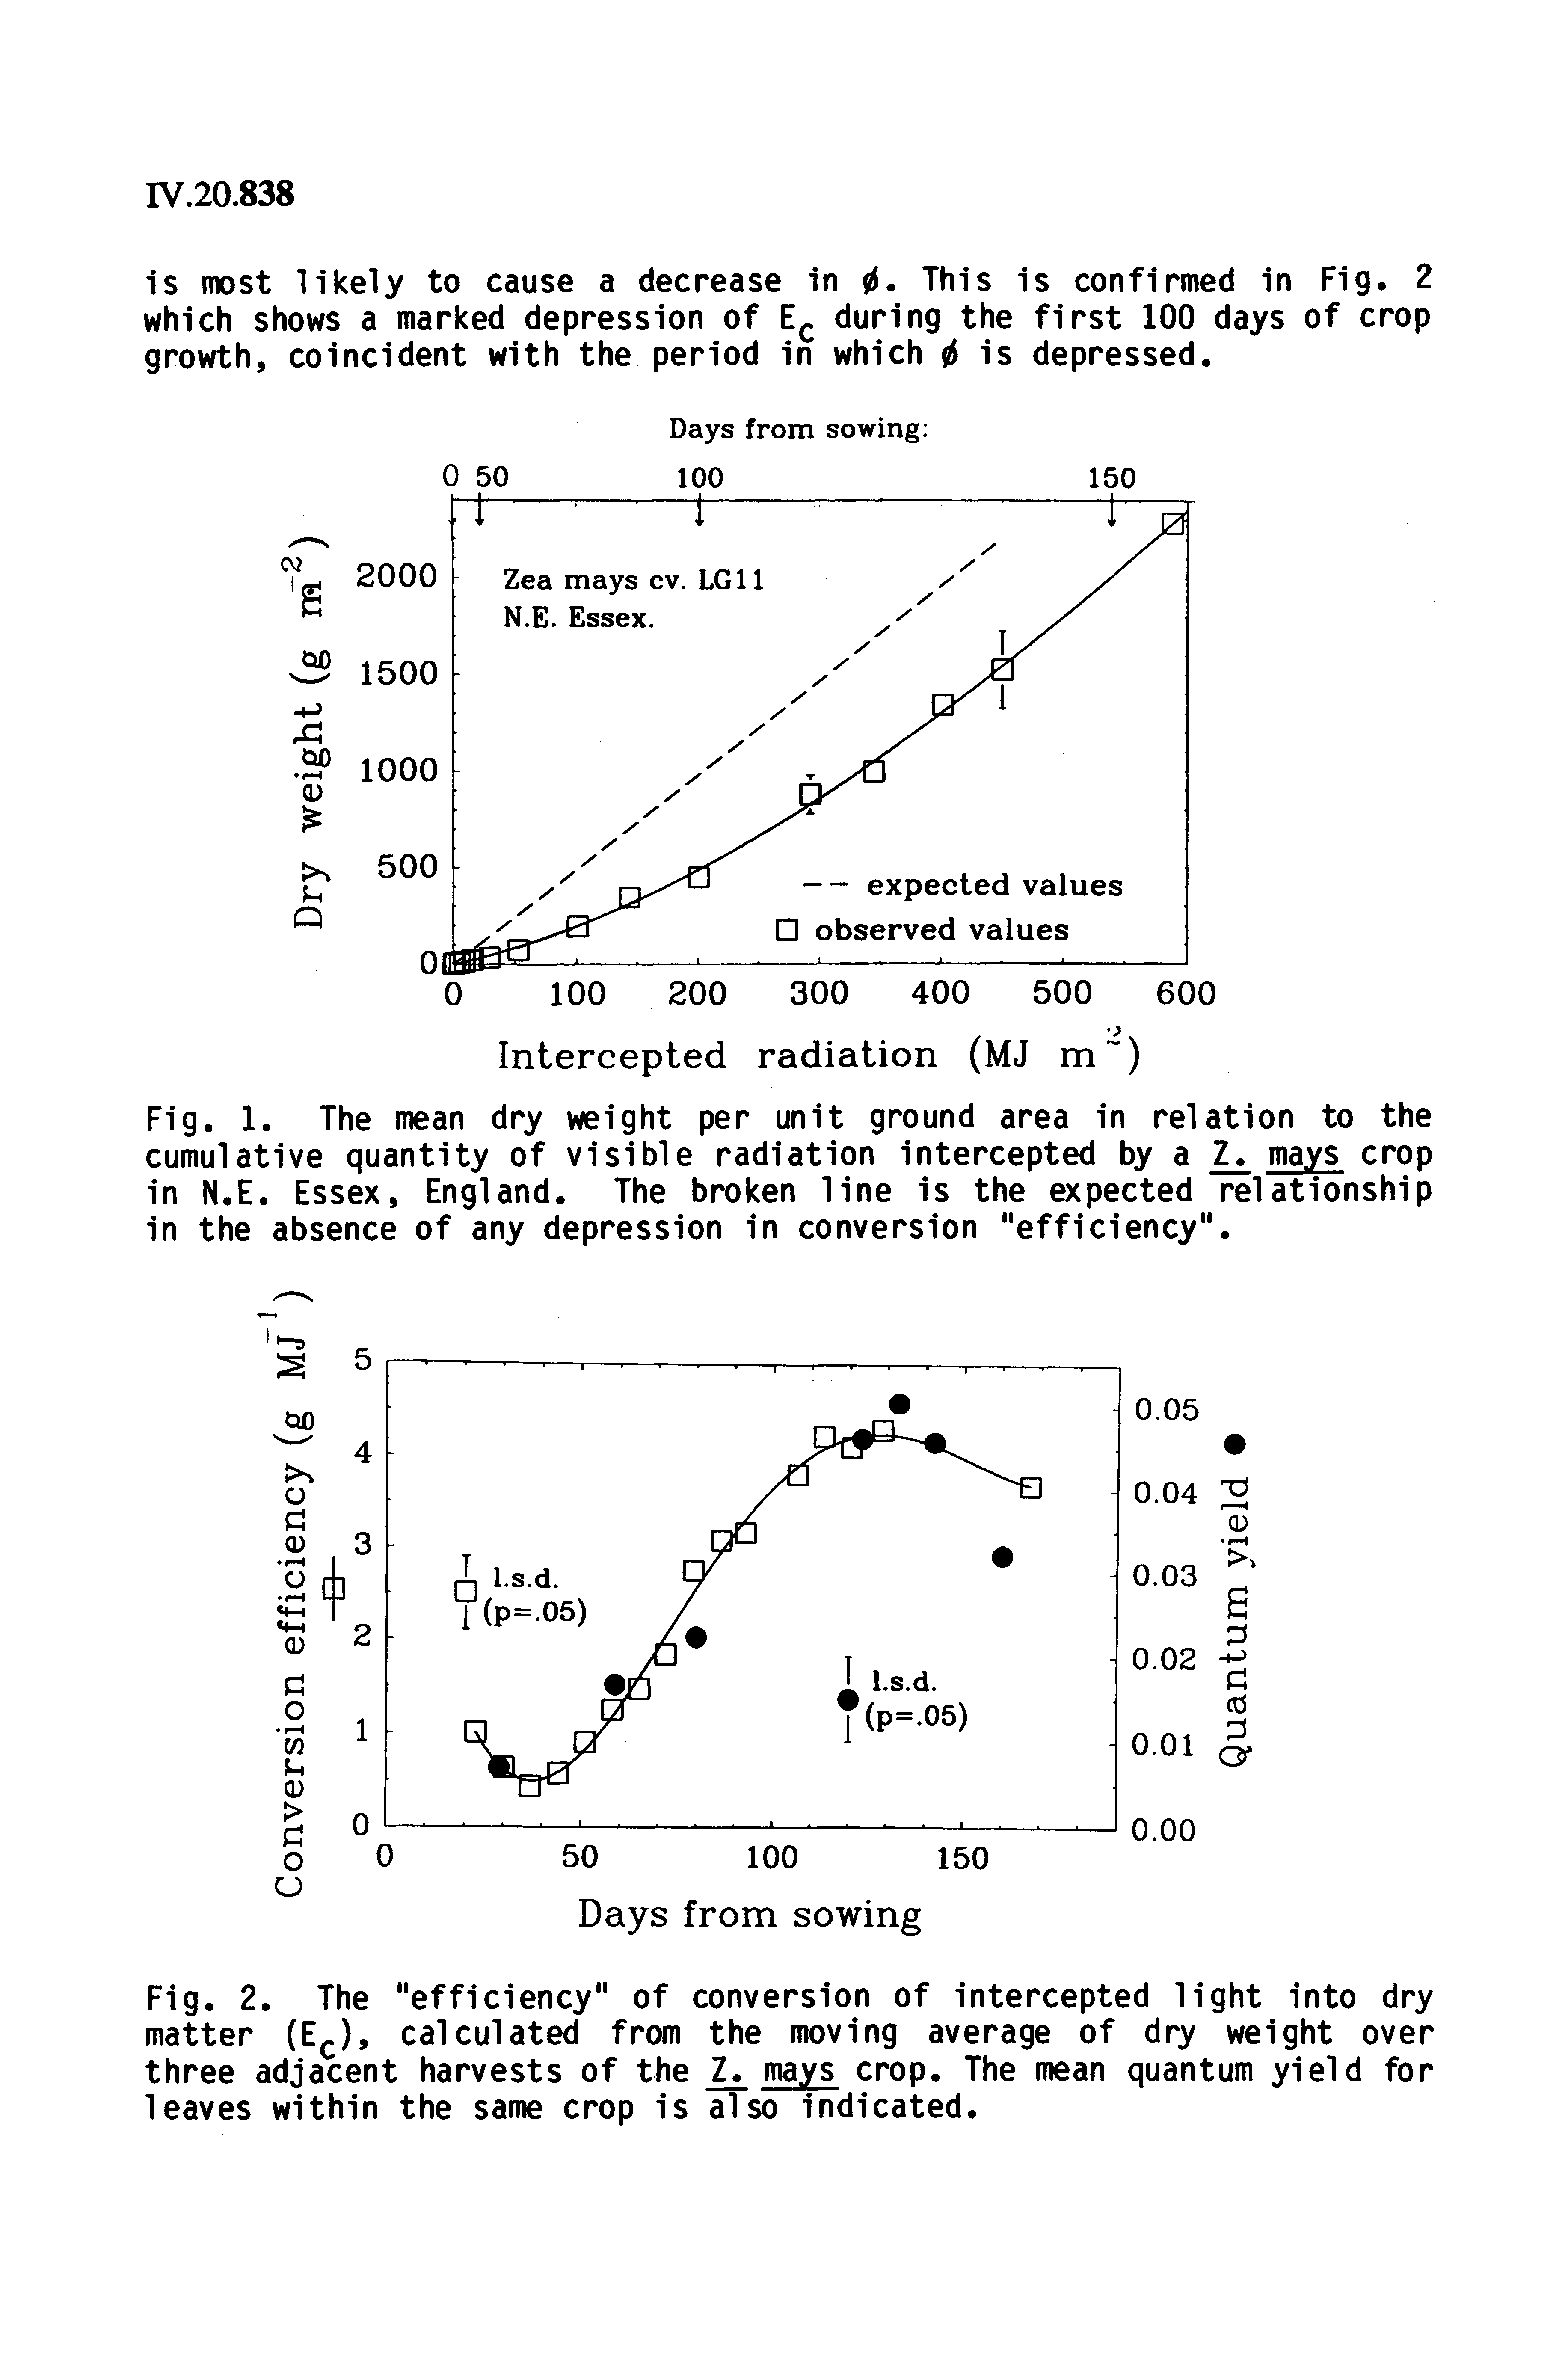 Fig. 2. The "efficiency" of conversion of intercepted light into dry matter (E. ), calculated from the moving average of dry weight over three adjacent harvests of the Z. mays crop. The mean quantum yield for leaves within the same crop is also indicated.